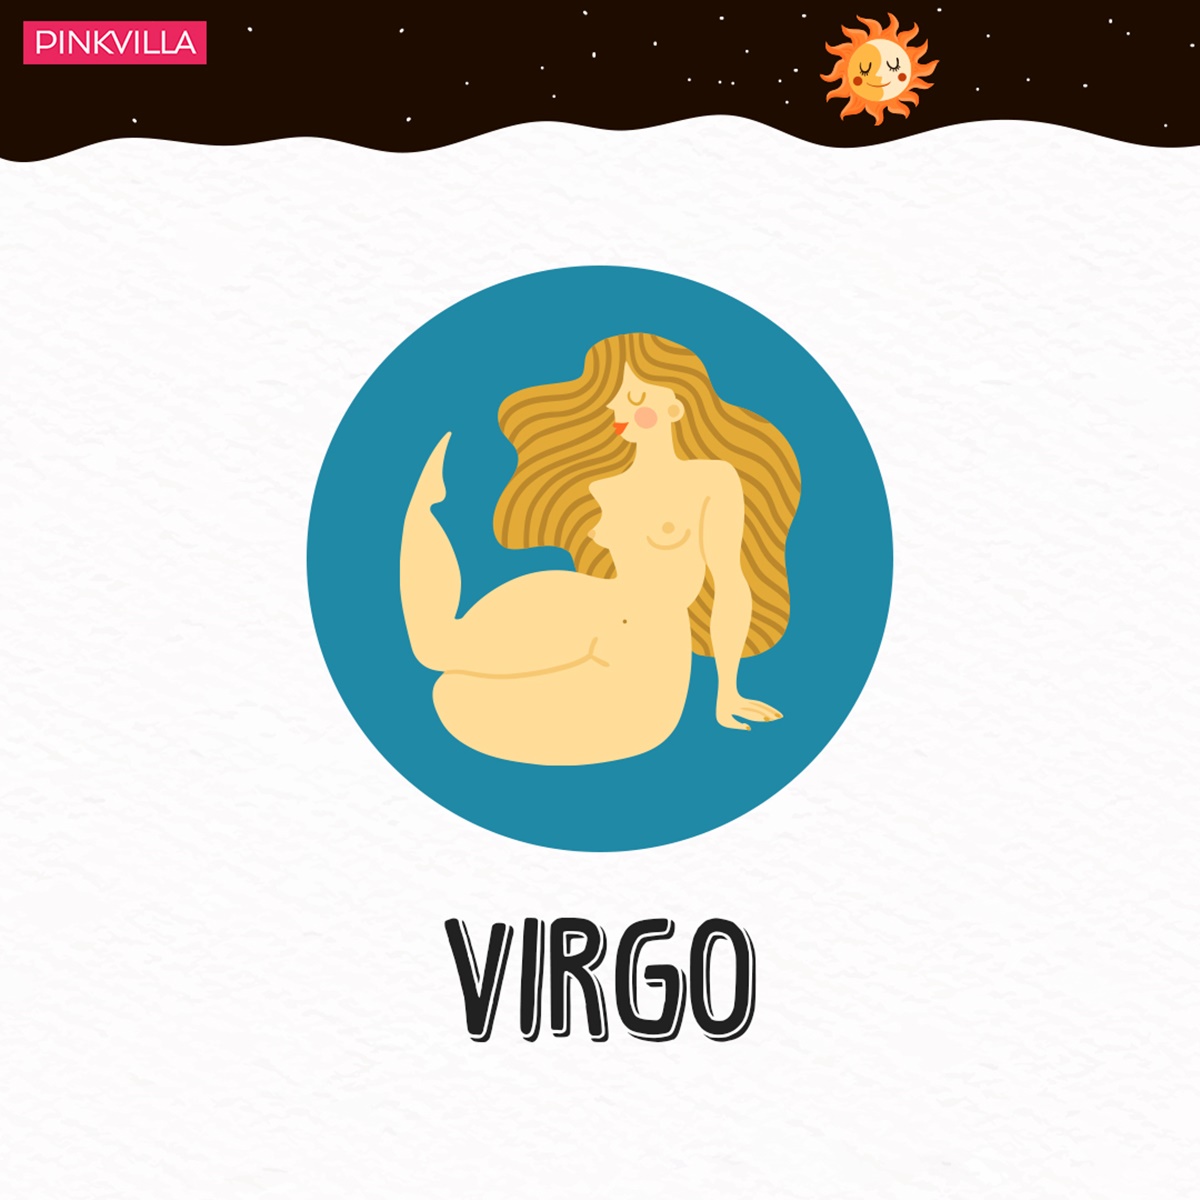 Zodiac signs who propose marriage in the dreamiest ways